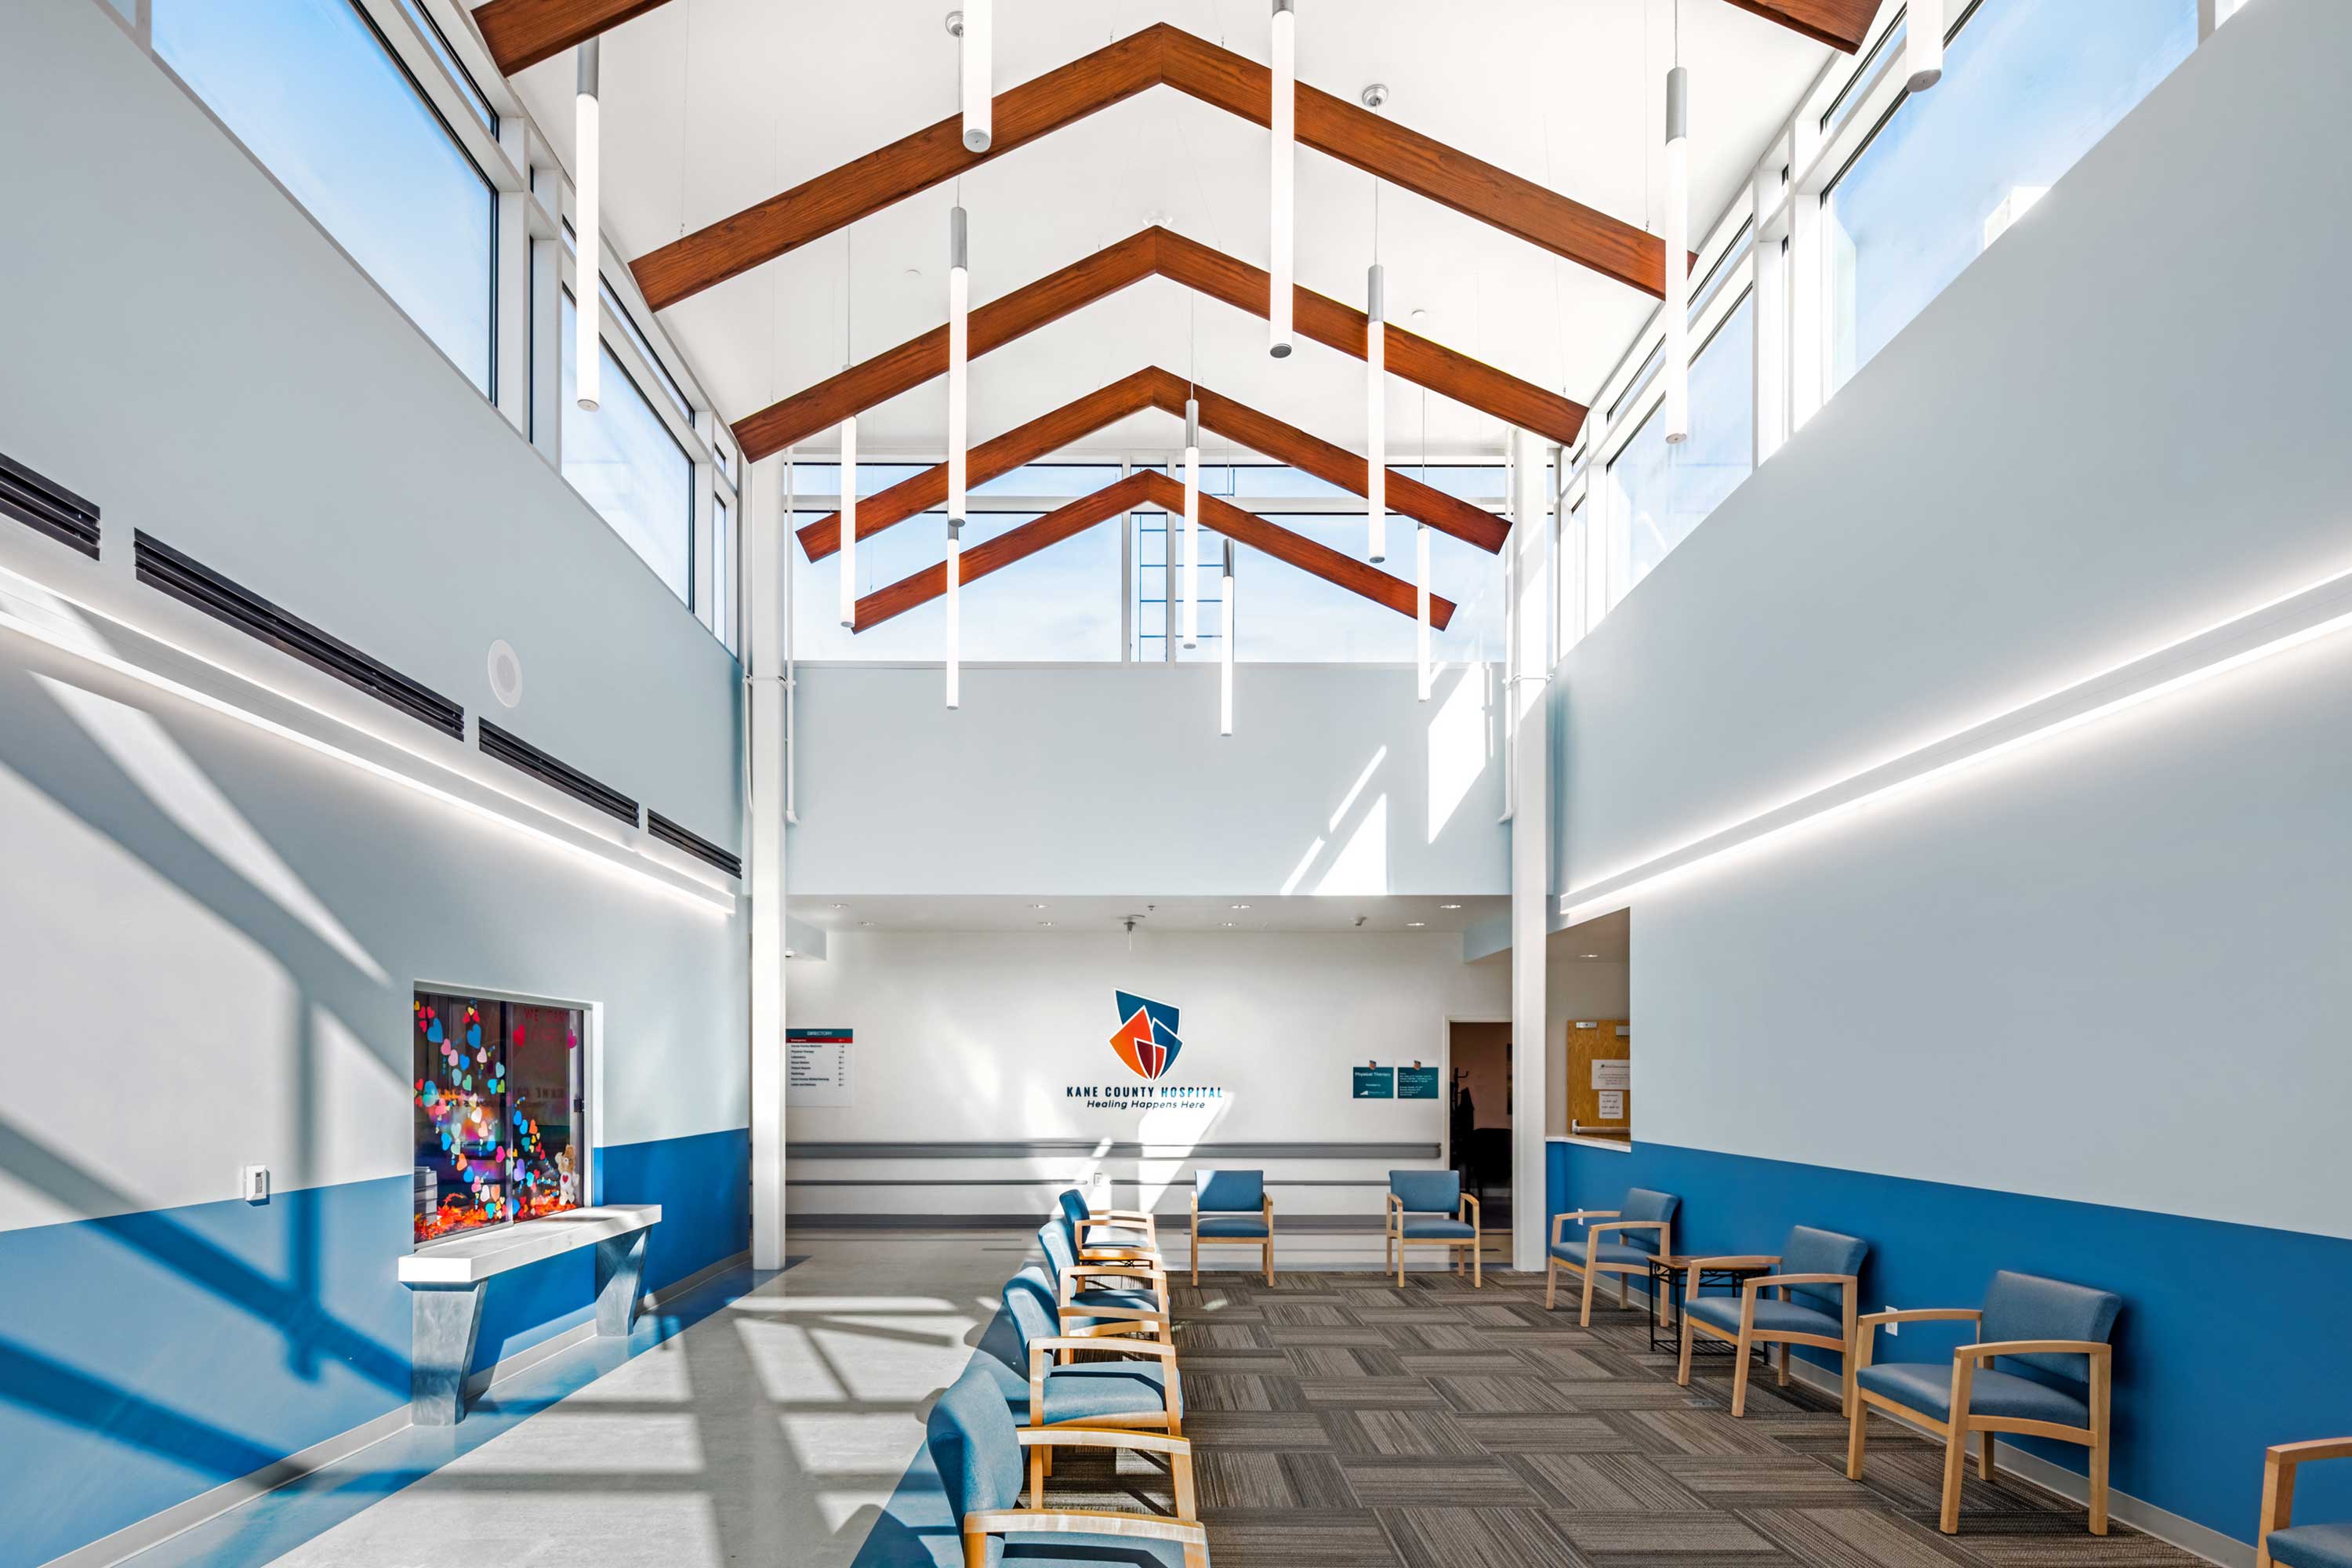 Kane County Hospital addition and remodel in Kanab, Utah by Big-D Construction. Architectural photography by Alan Blakely.